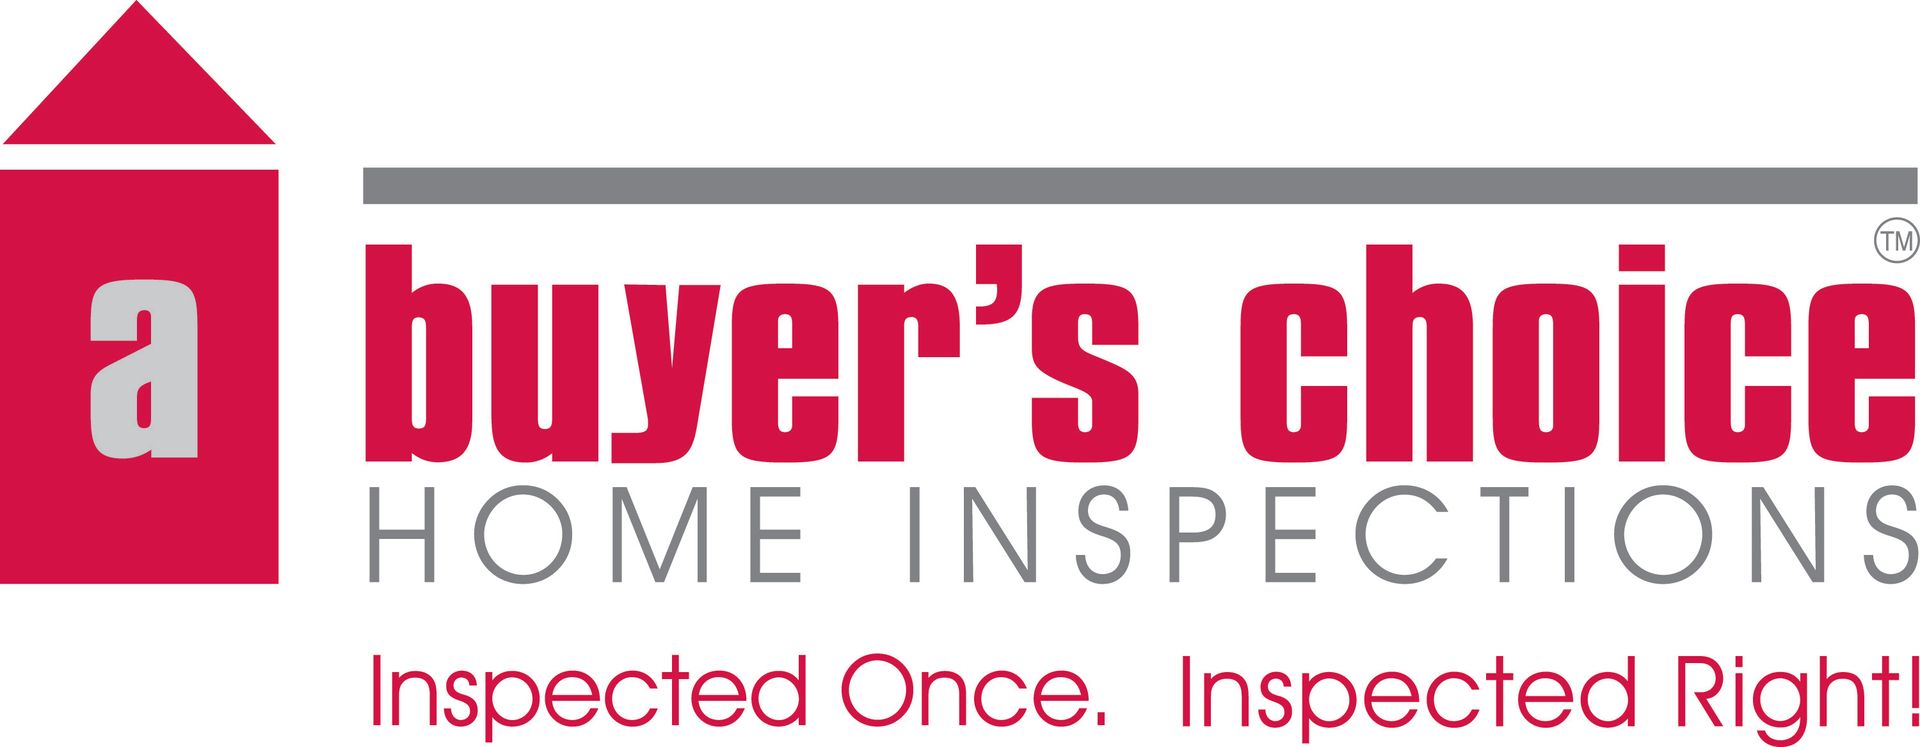 the logo for a buyer 's choice home inspections